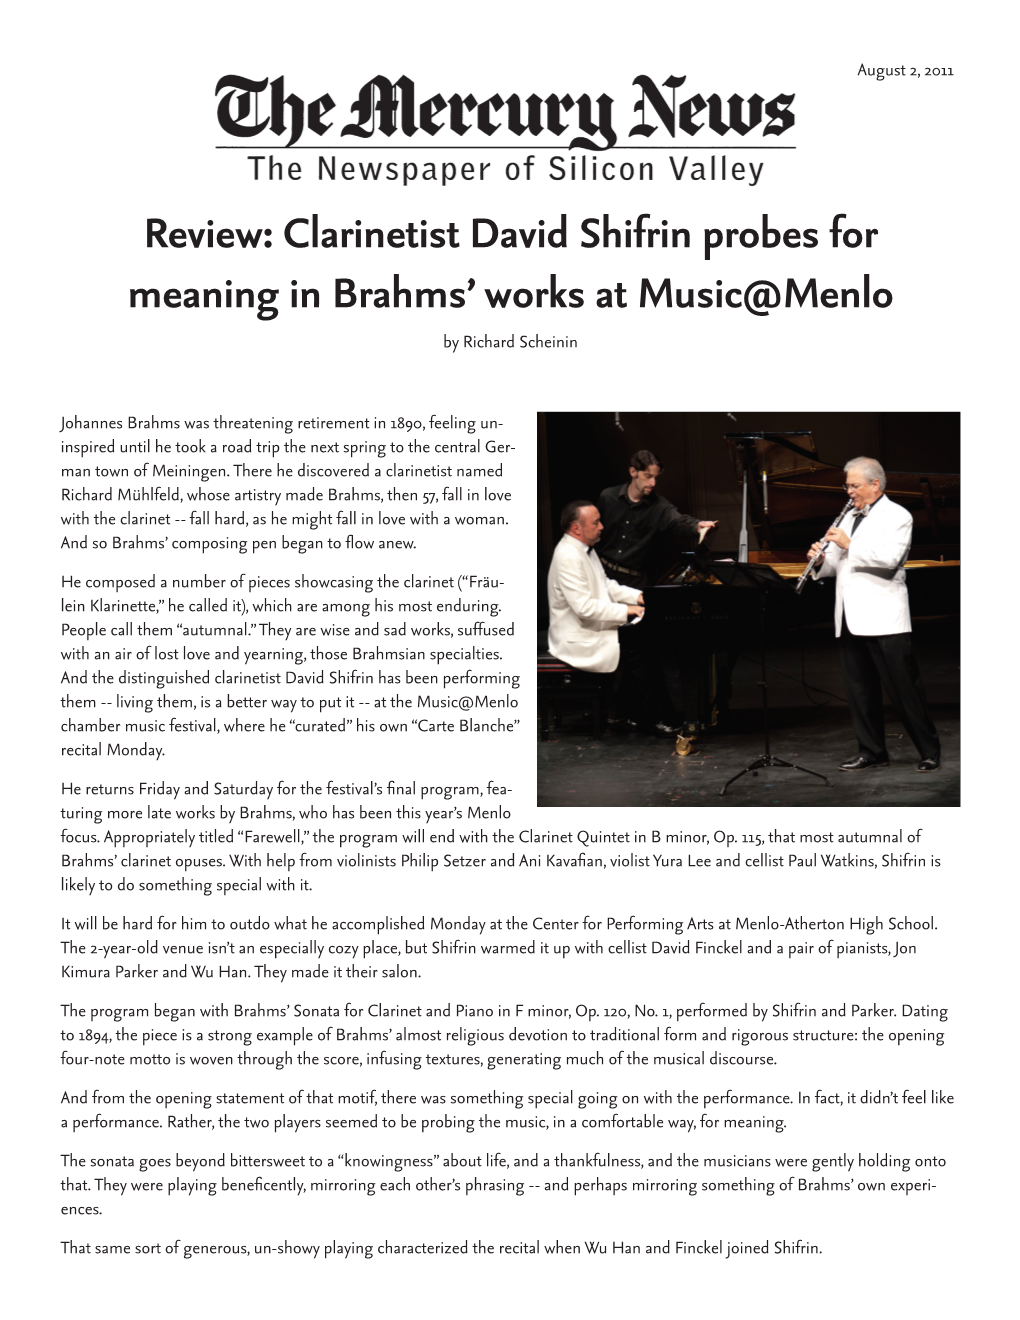 Clarinetist David Shifrin Probes for Meaning in Brahms’ Works at Music@Menlo by Richard Scheinin